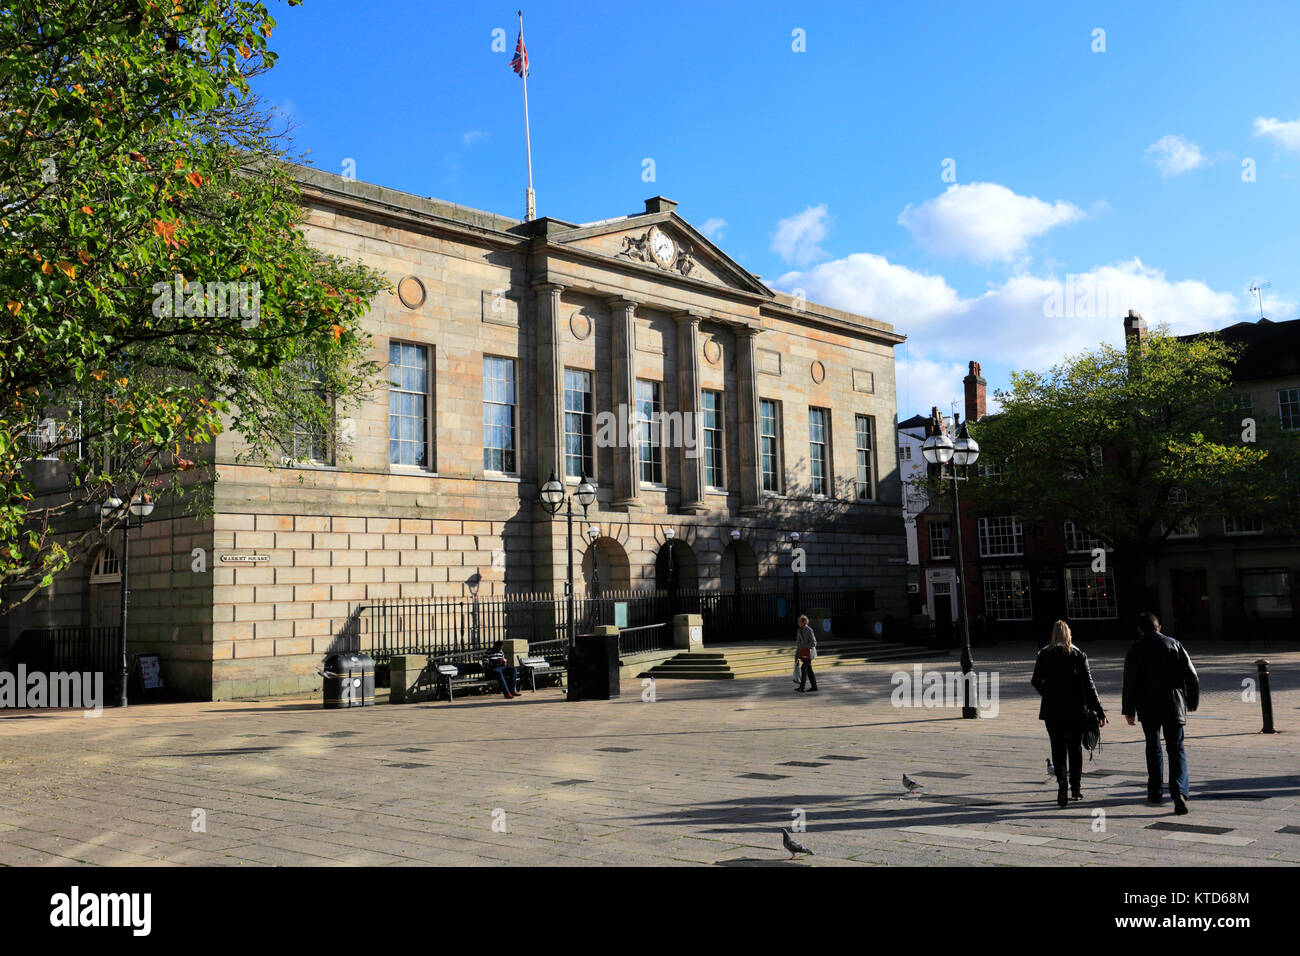 The Shire Hall building, market place, Stafford town, Staffordshire, England, UK Stock Photo